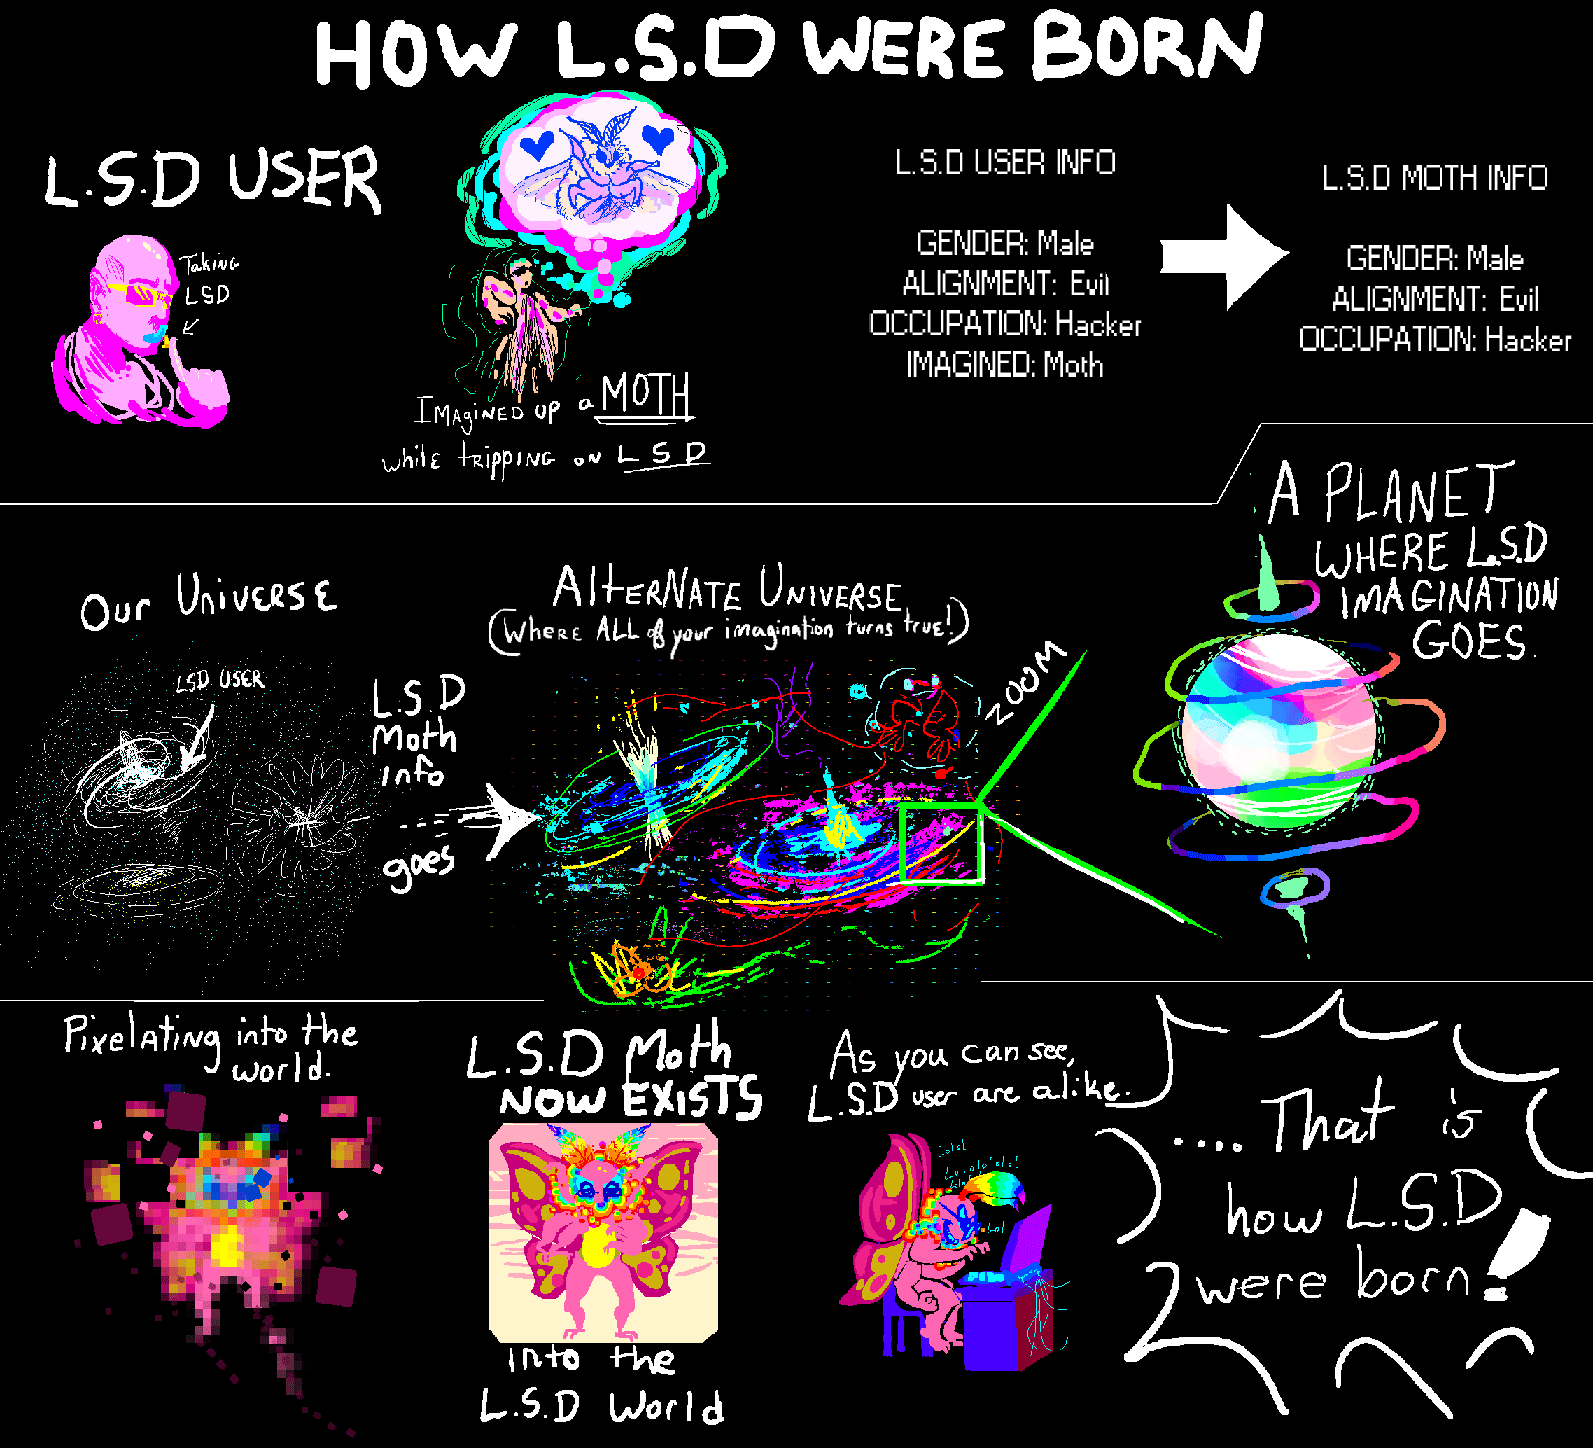 How L.S.D Species were Born by Reptonic